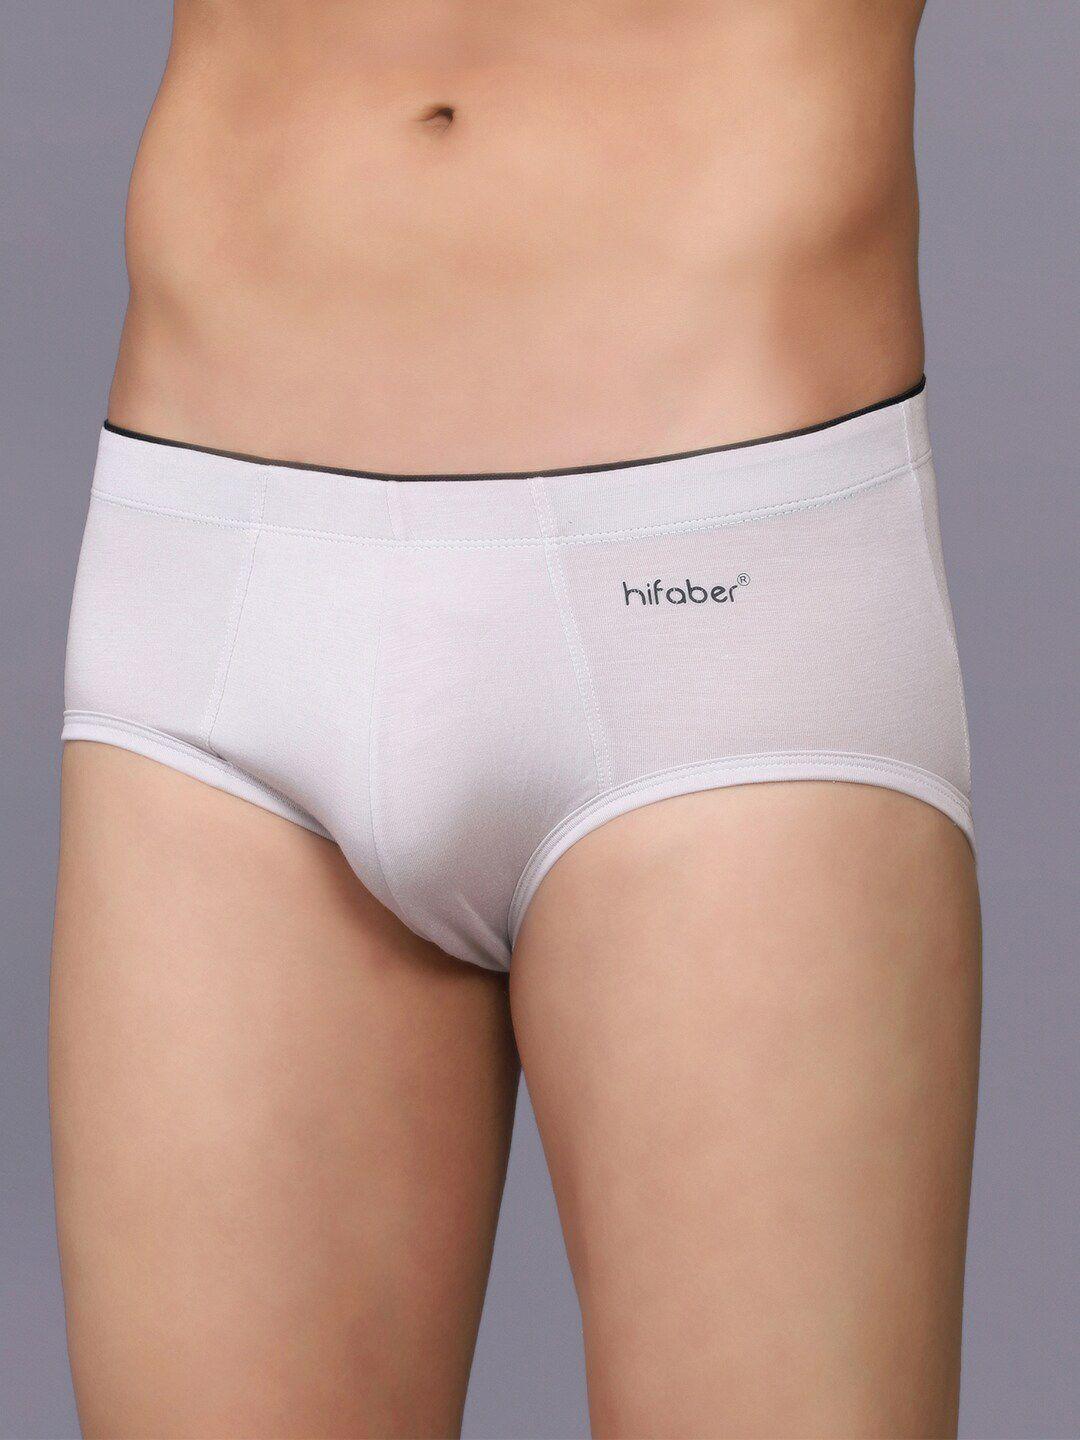 hifaber-men-mid-rise-anti-bacterial-hipster-briefs-h0665_s-